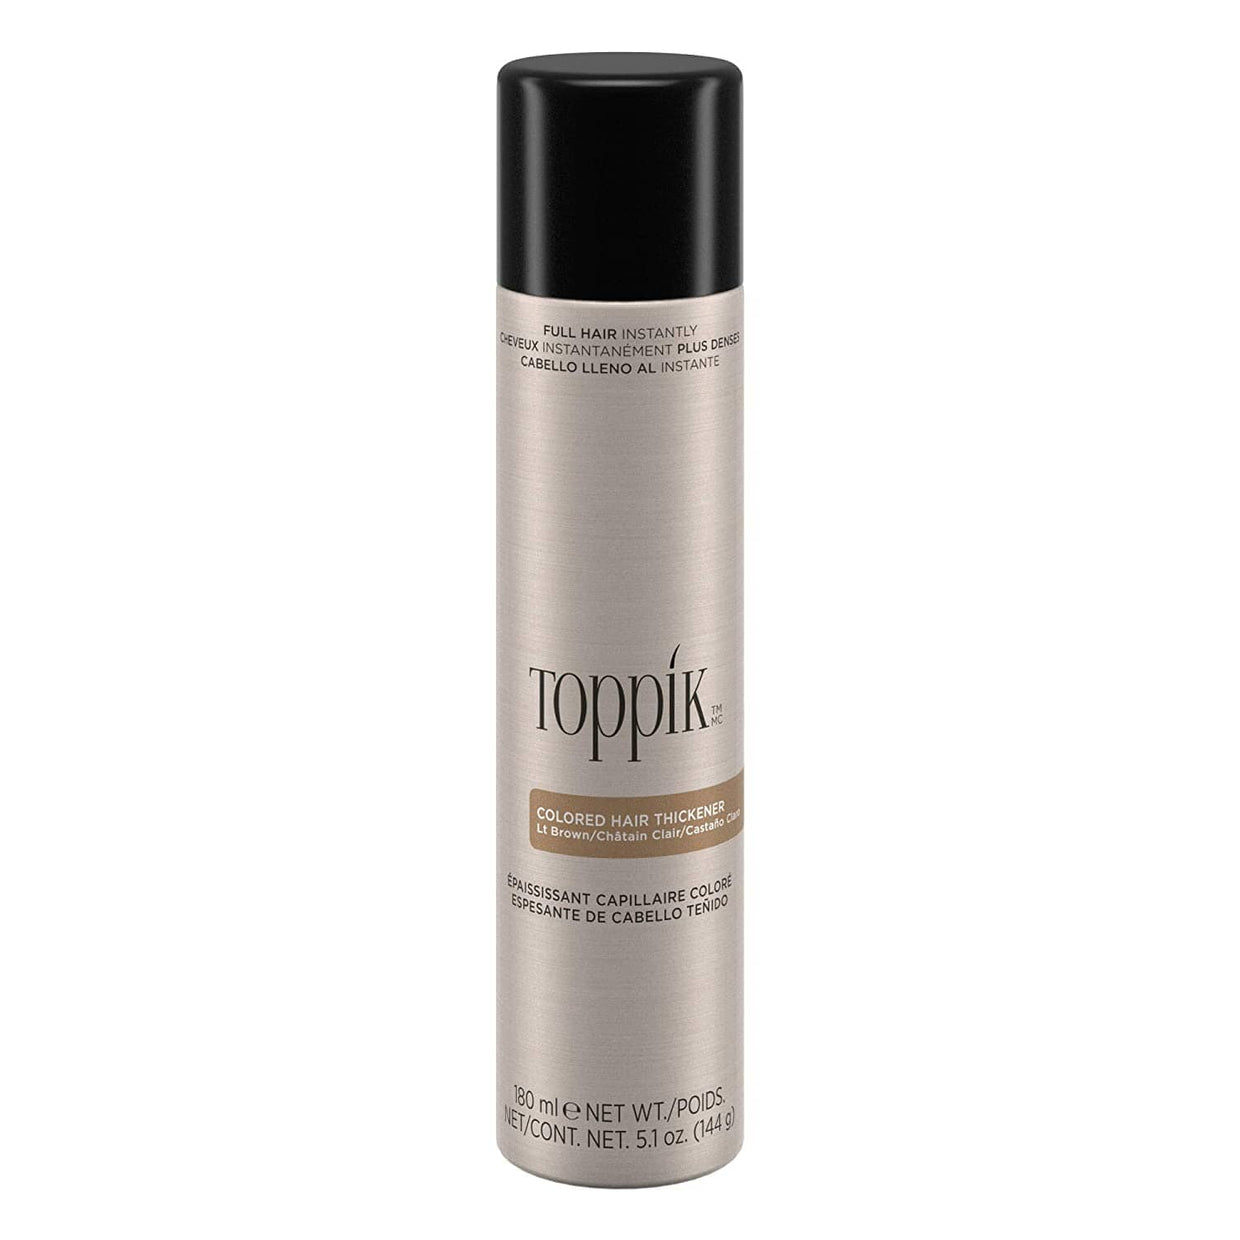 Toppik Colored Hair Thickener - LIGHT BROWN Toppik 5.1 oz/144g bottle Shop at Exclusive Beauty Club